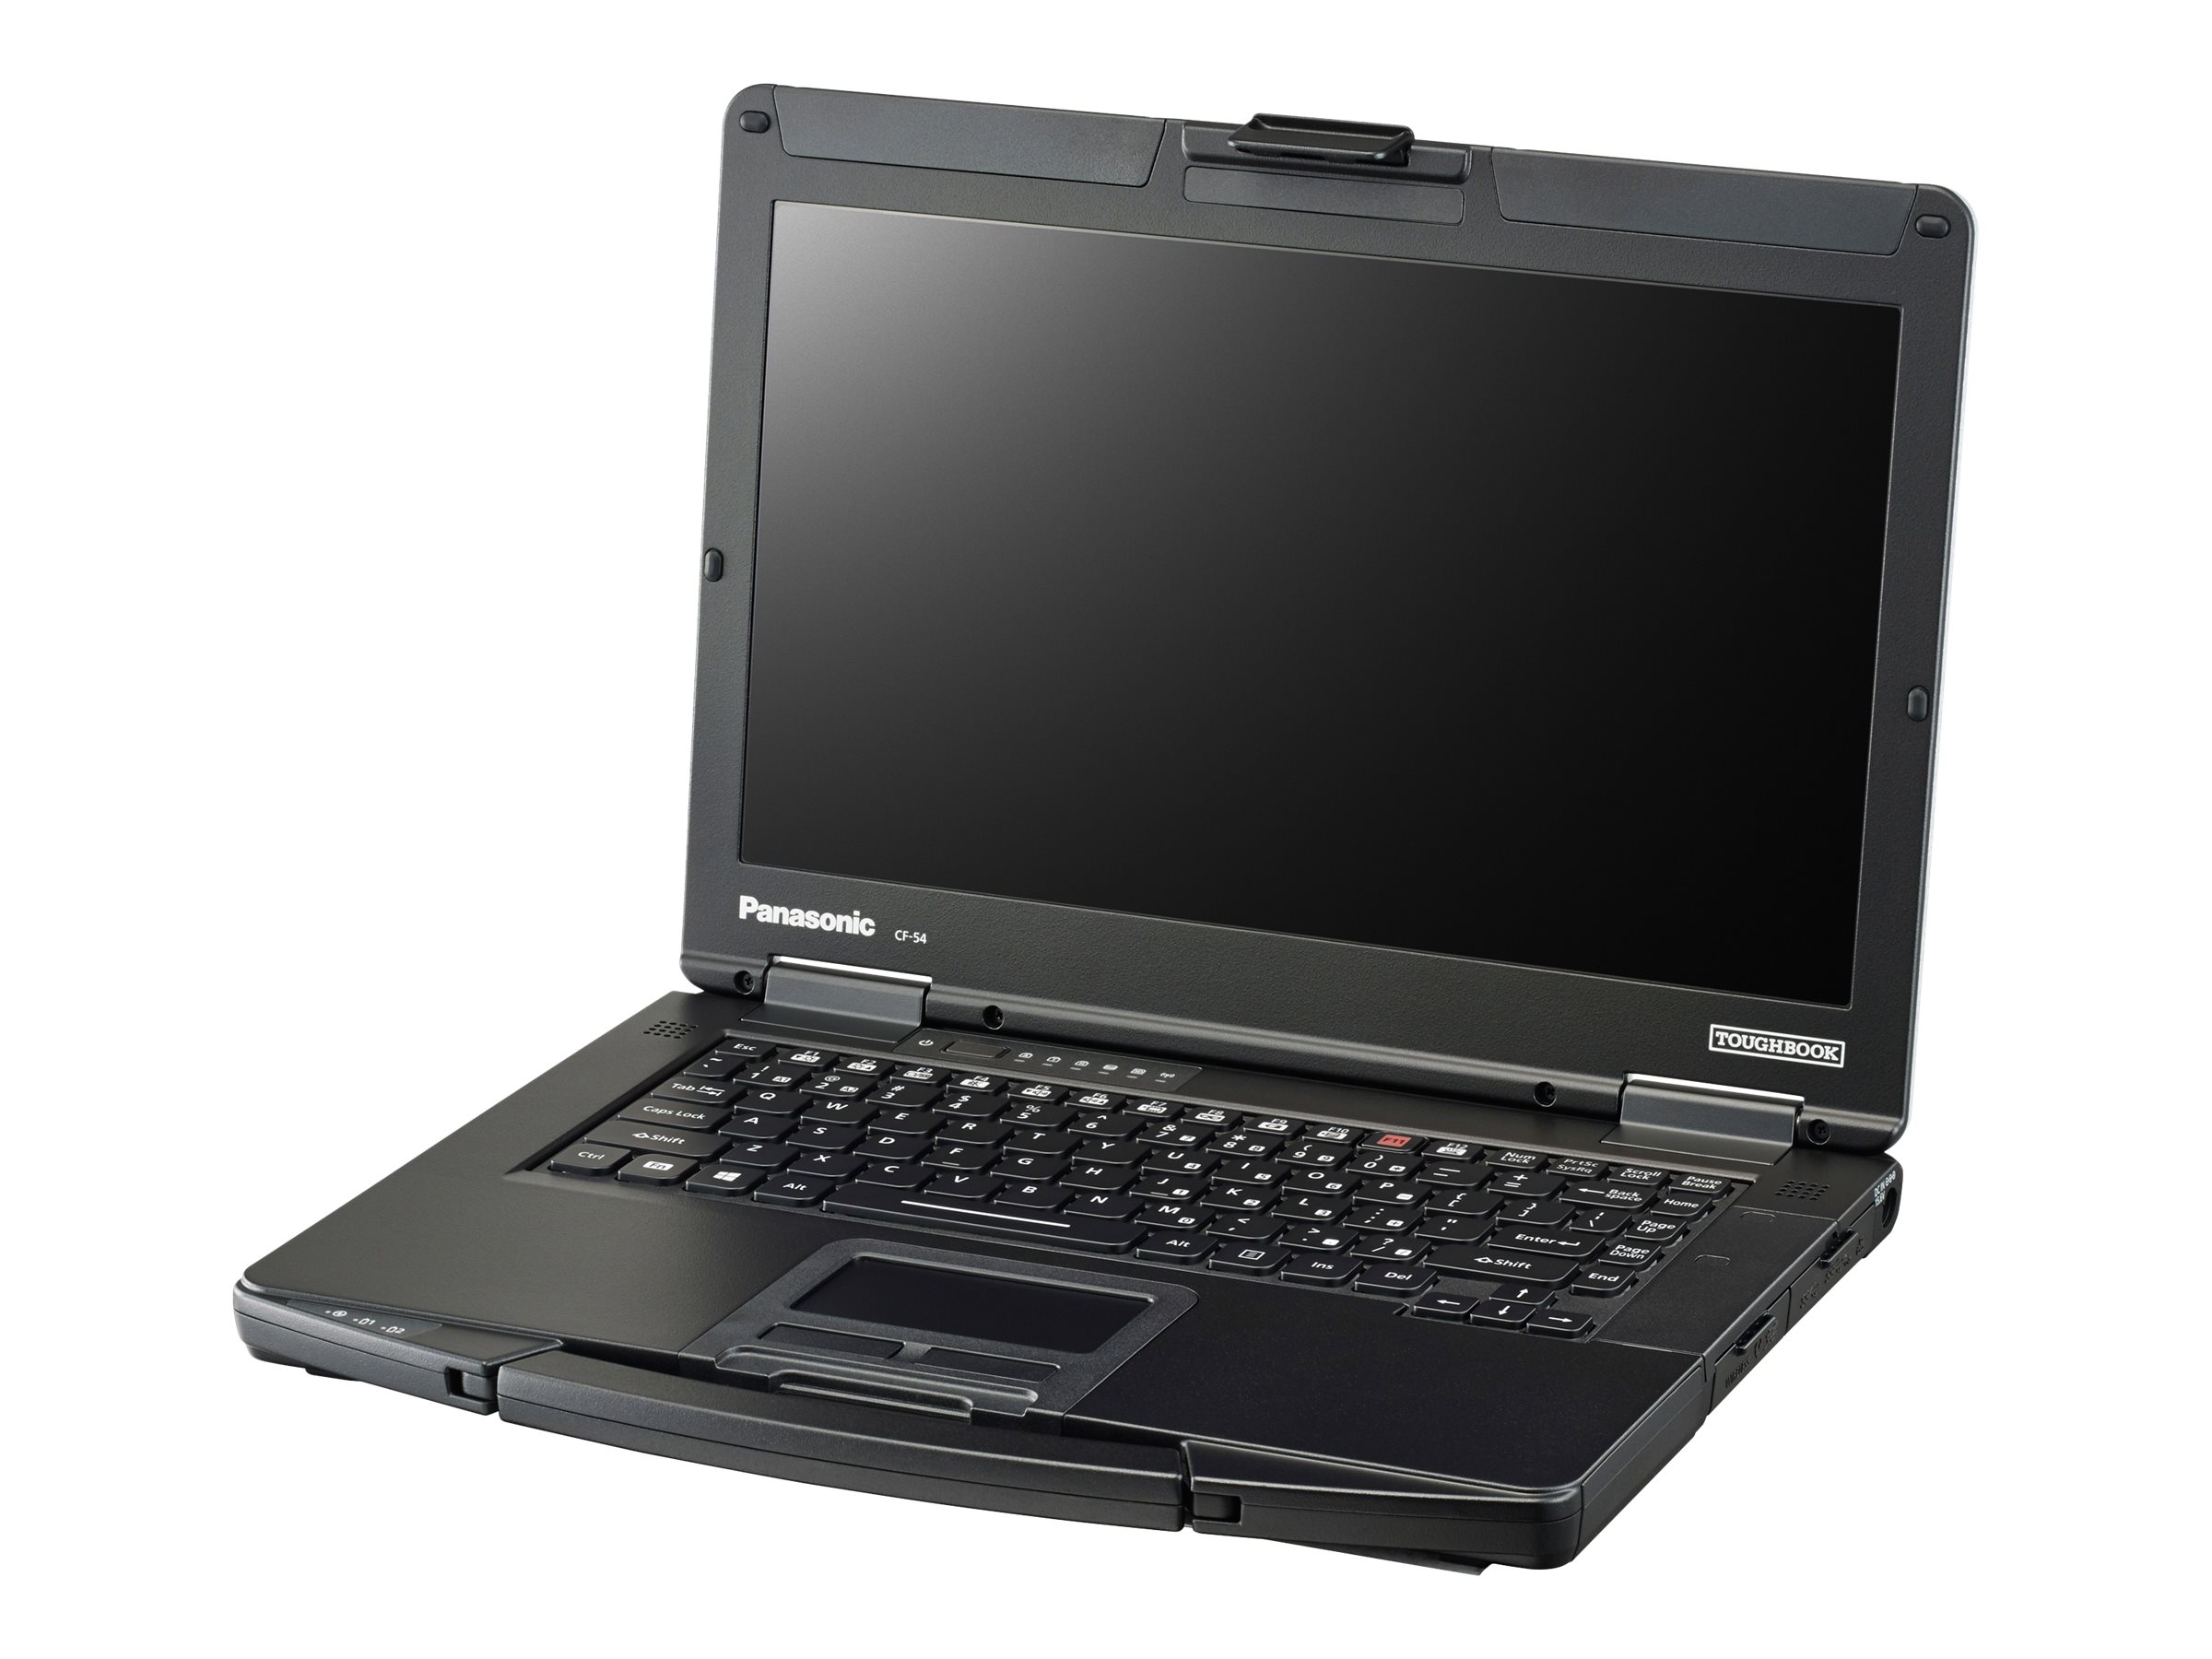 Panasonic Toughbook 54 Prime - Intel Core i7 - 7600U / up to 3.9 GHz - vPro - Win 10 Pro - HD Graphics 620 - 8 GB RAM - 256 GB SSD - 14" 1366 x 768 (HD) - Wi-Fi 5 - with Toughbook Preferred - image 1 of 16